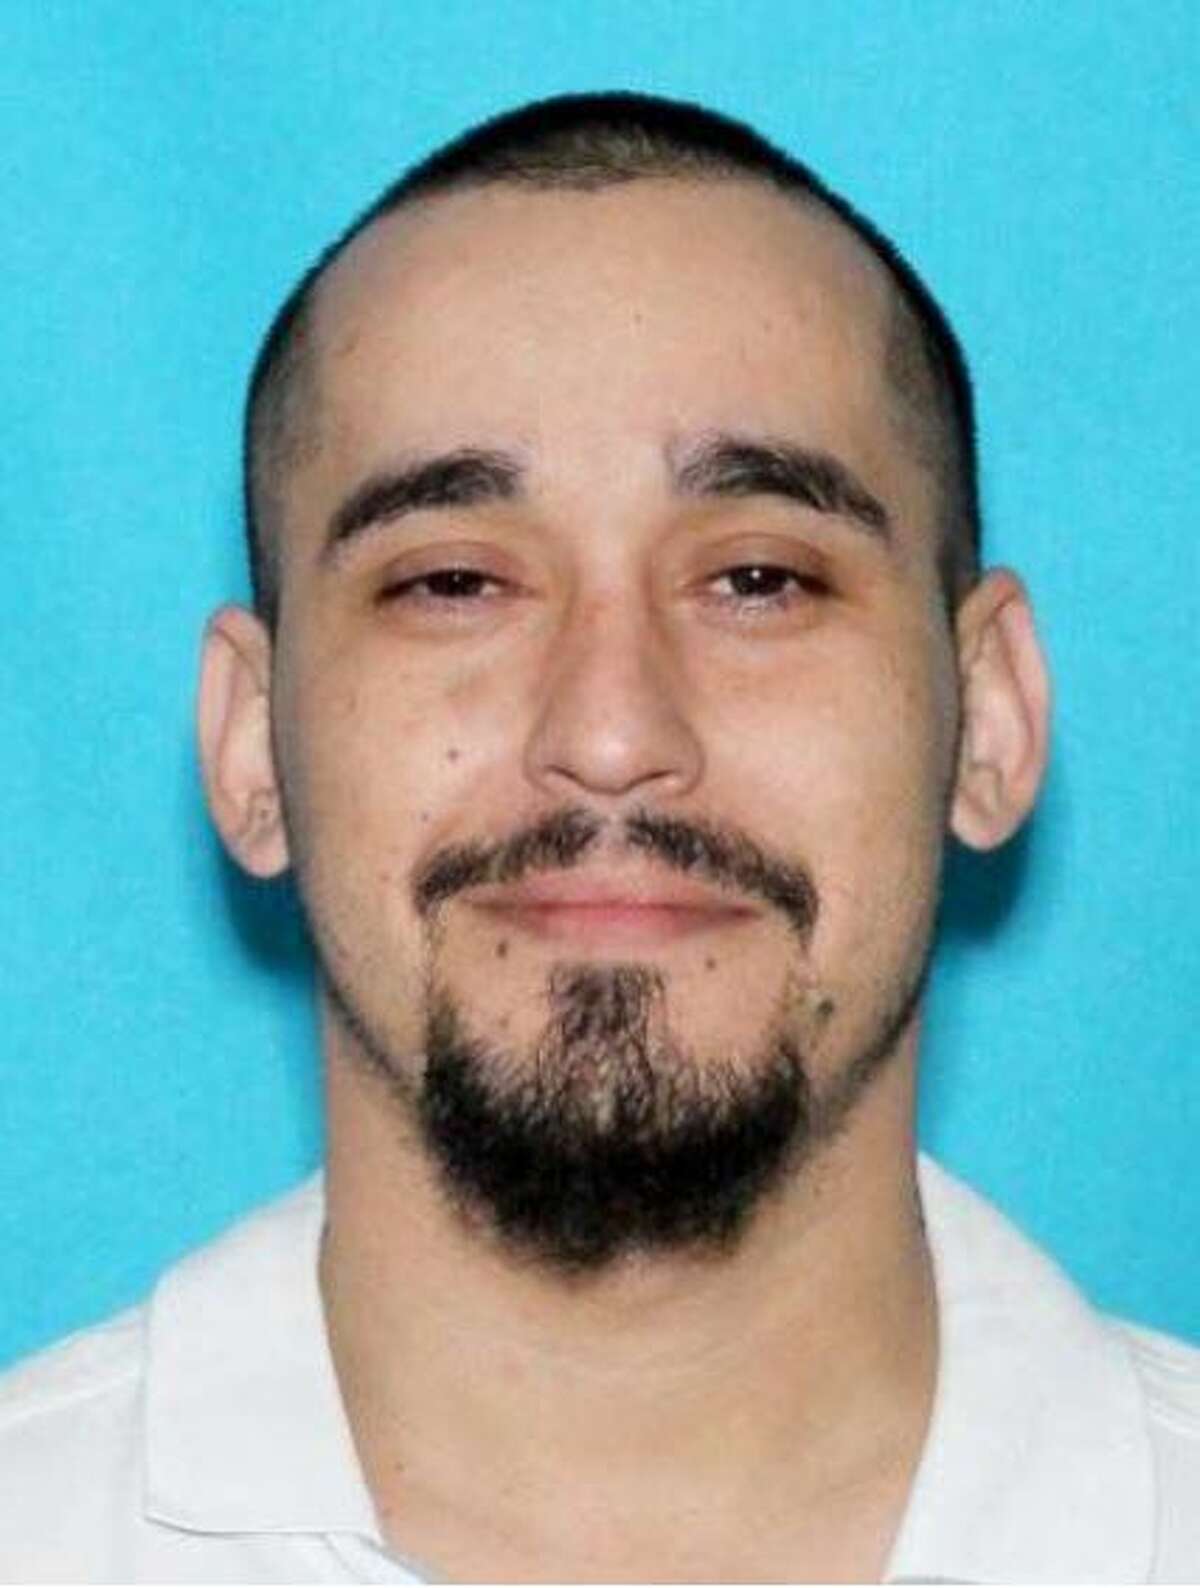 Kirkland police seek the public's help in finding 31-year-old Juan Felipe Galeana-Madrigal, also known as "Pelon." He was charged Wednesday in the May 2016 murder of Francisco Mendoza in Kirkland.